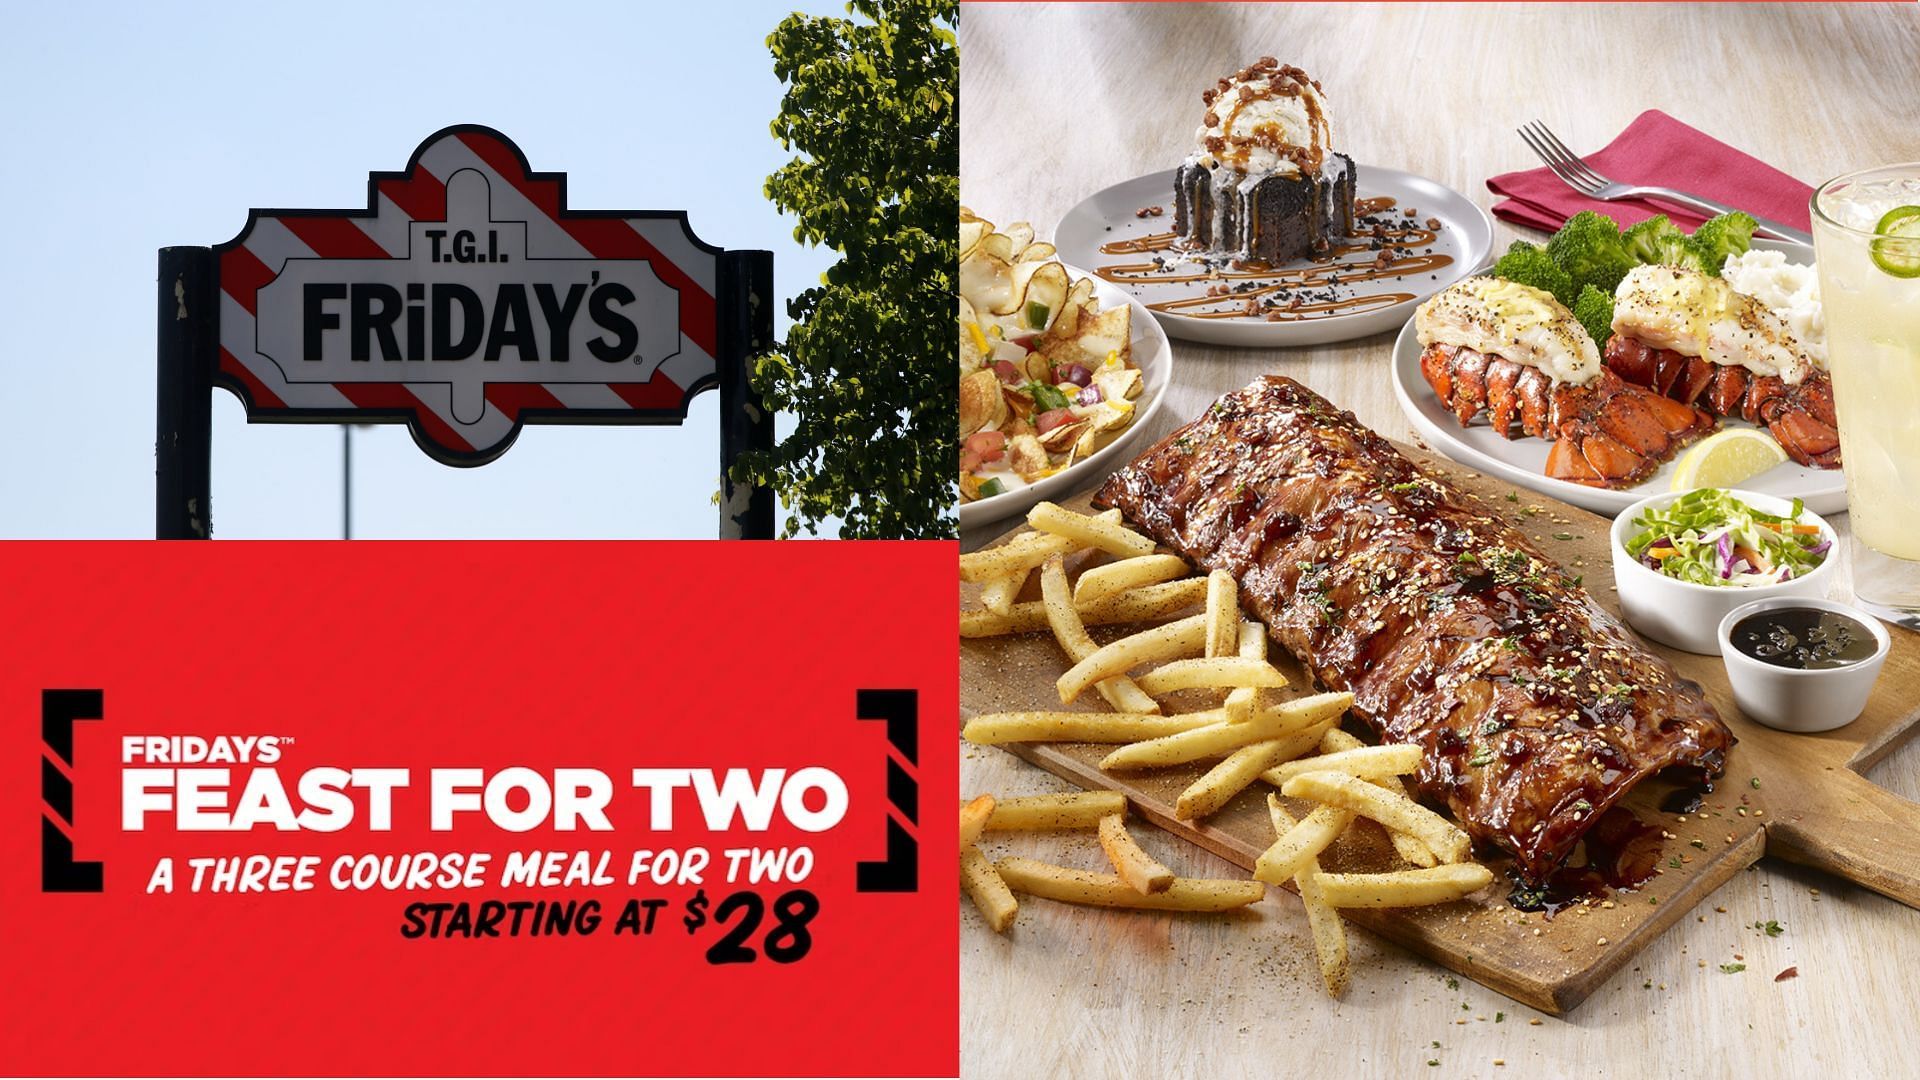 TGI Fridays introduces a limited-time Feast for Two menu starting at $28 (Image via TGI Fridays/David Rogers/Getty Images)